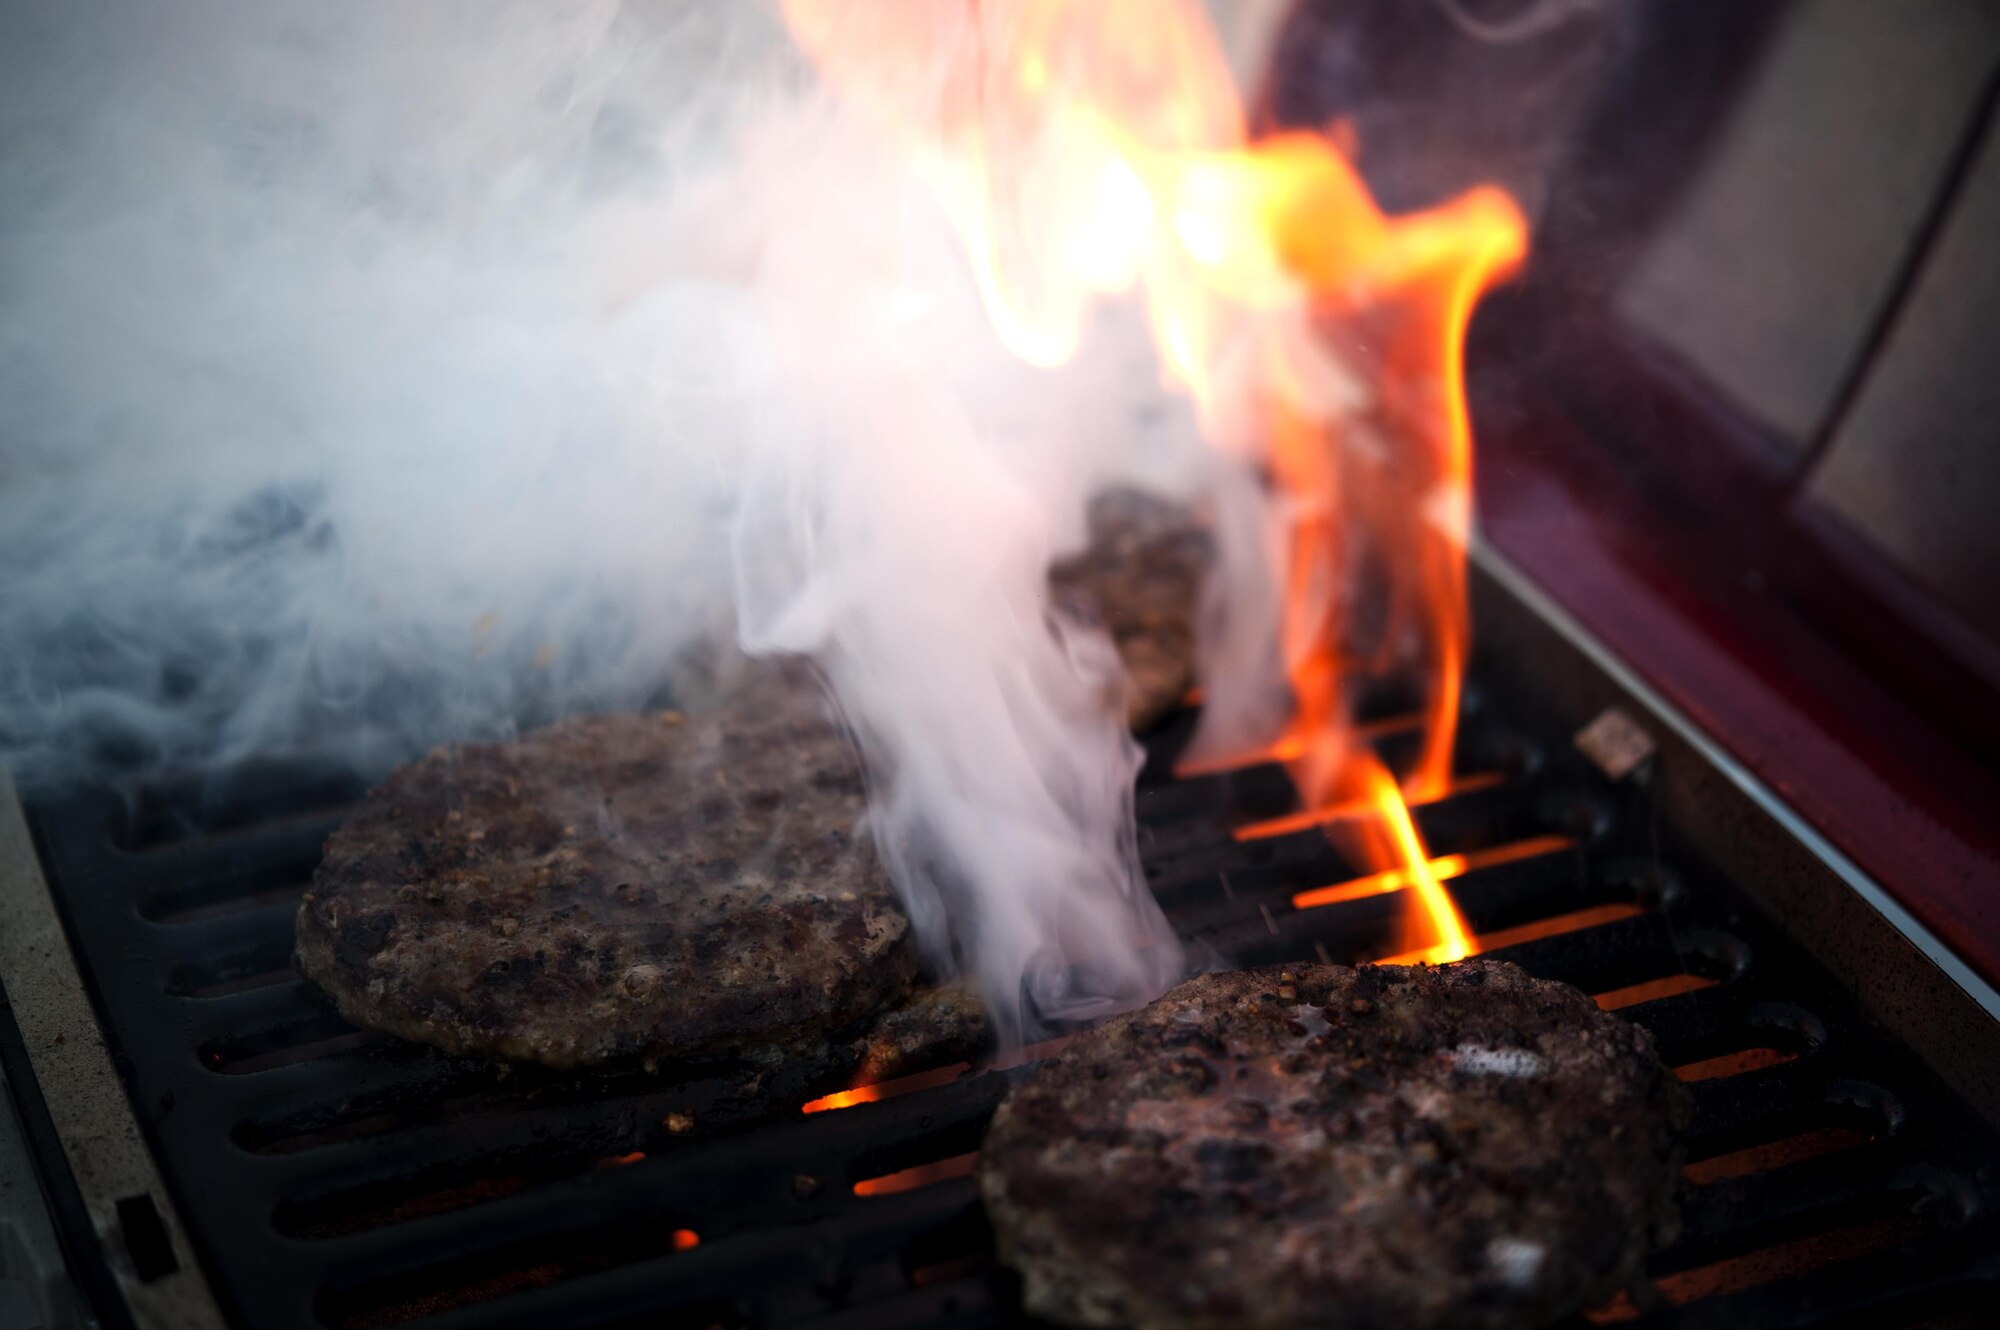 A grill flairs up while burgers cook during the 4th of July party at the Goodfellow Recreational Camp, Texas, July 4, 2015. During the celebration, team Goodfellow members enjoyed barbeque, live music and fireworks. (U.S. Air Force photo by Senior Airman Scott Jackson/Released)